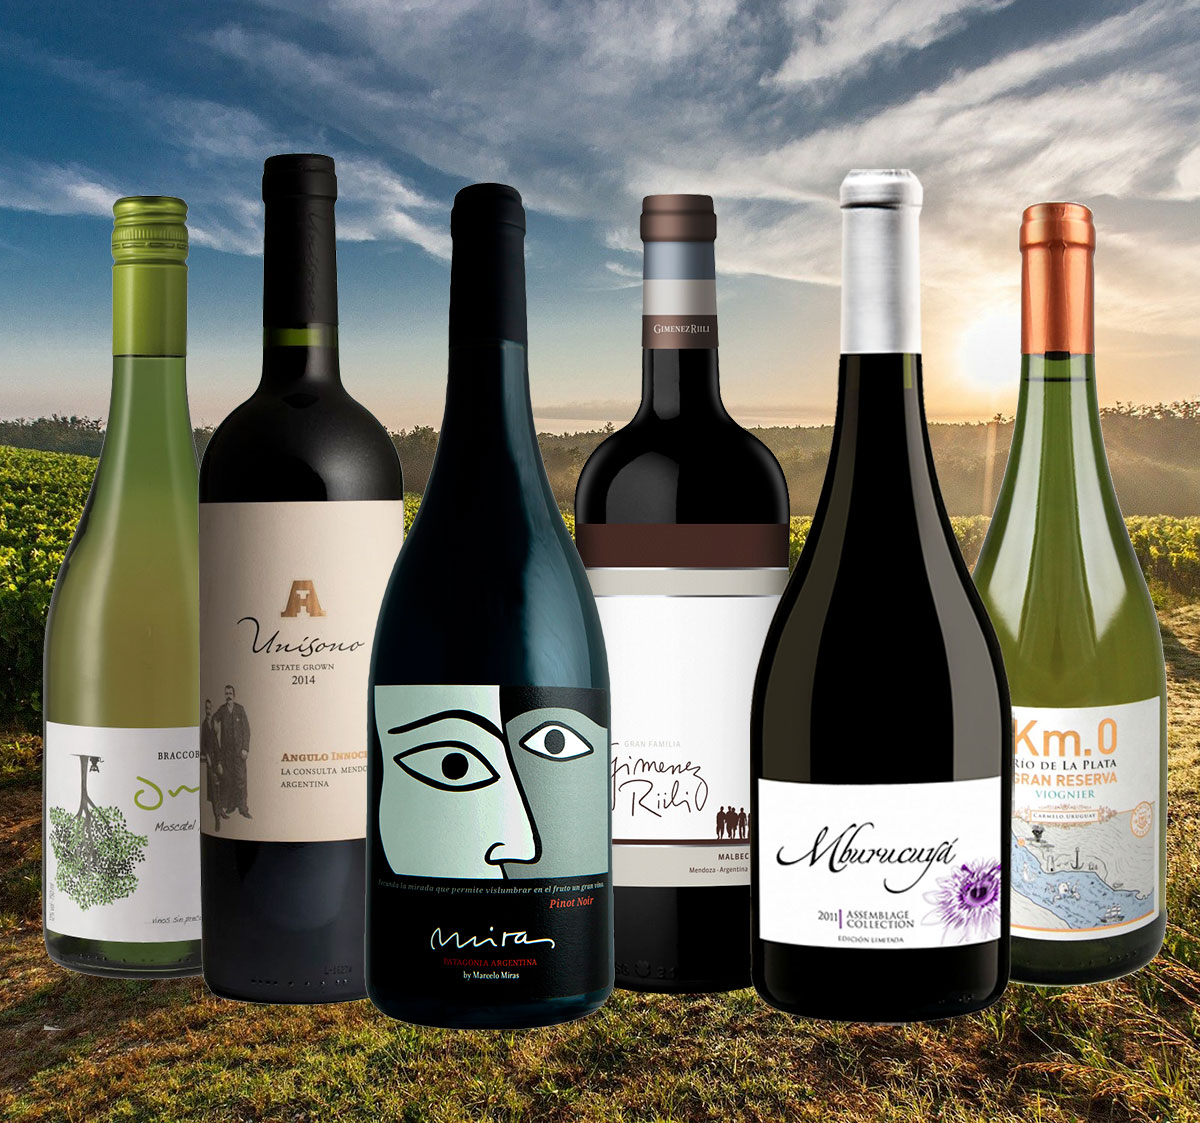 Wine tasting pack: The best of Argentina and Uruguay